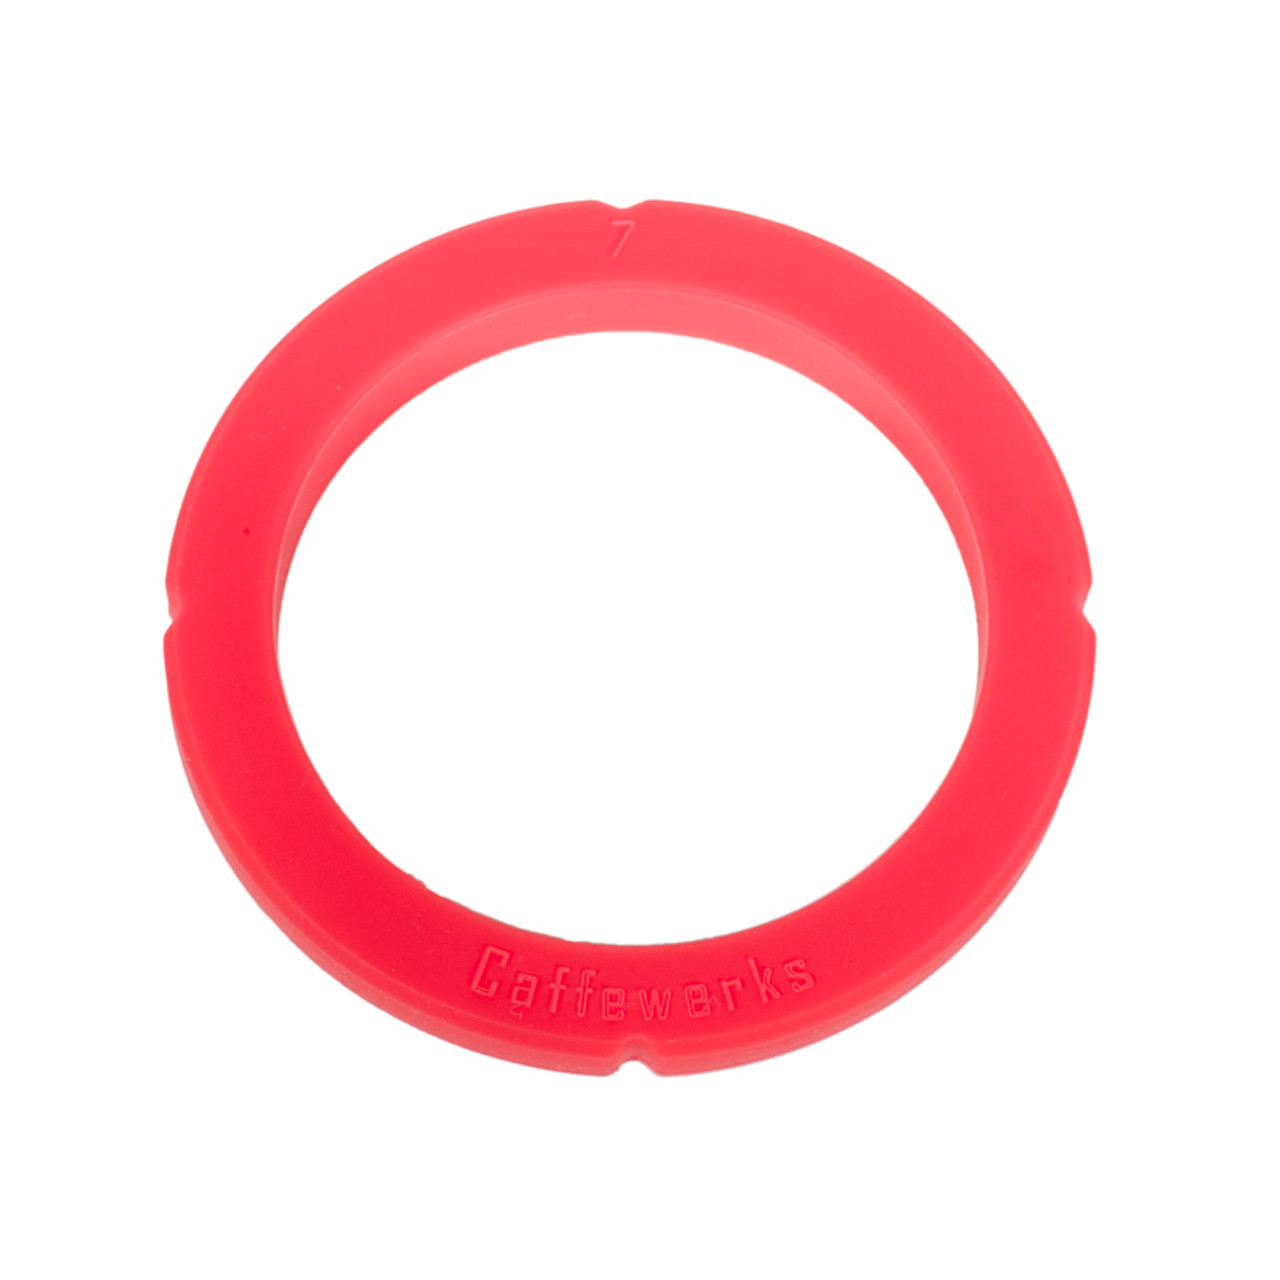 GROLSCH GASKETS 25 NEW RED SILICONE RUBBER GASKET FOR EZCAP TYPE